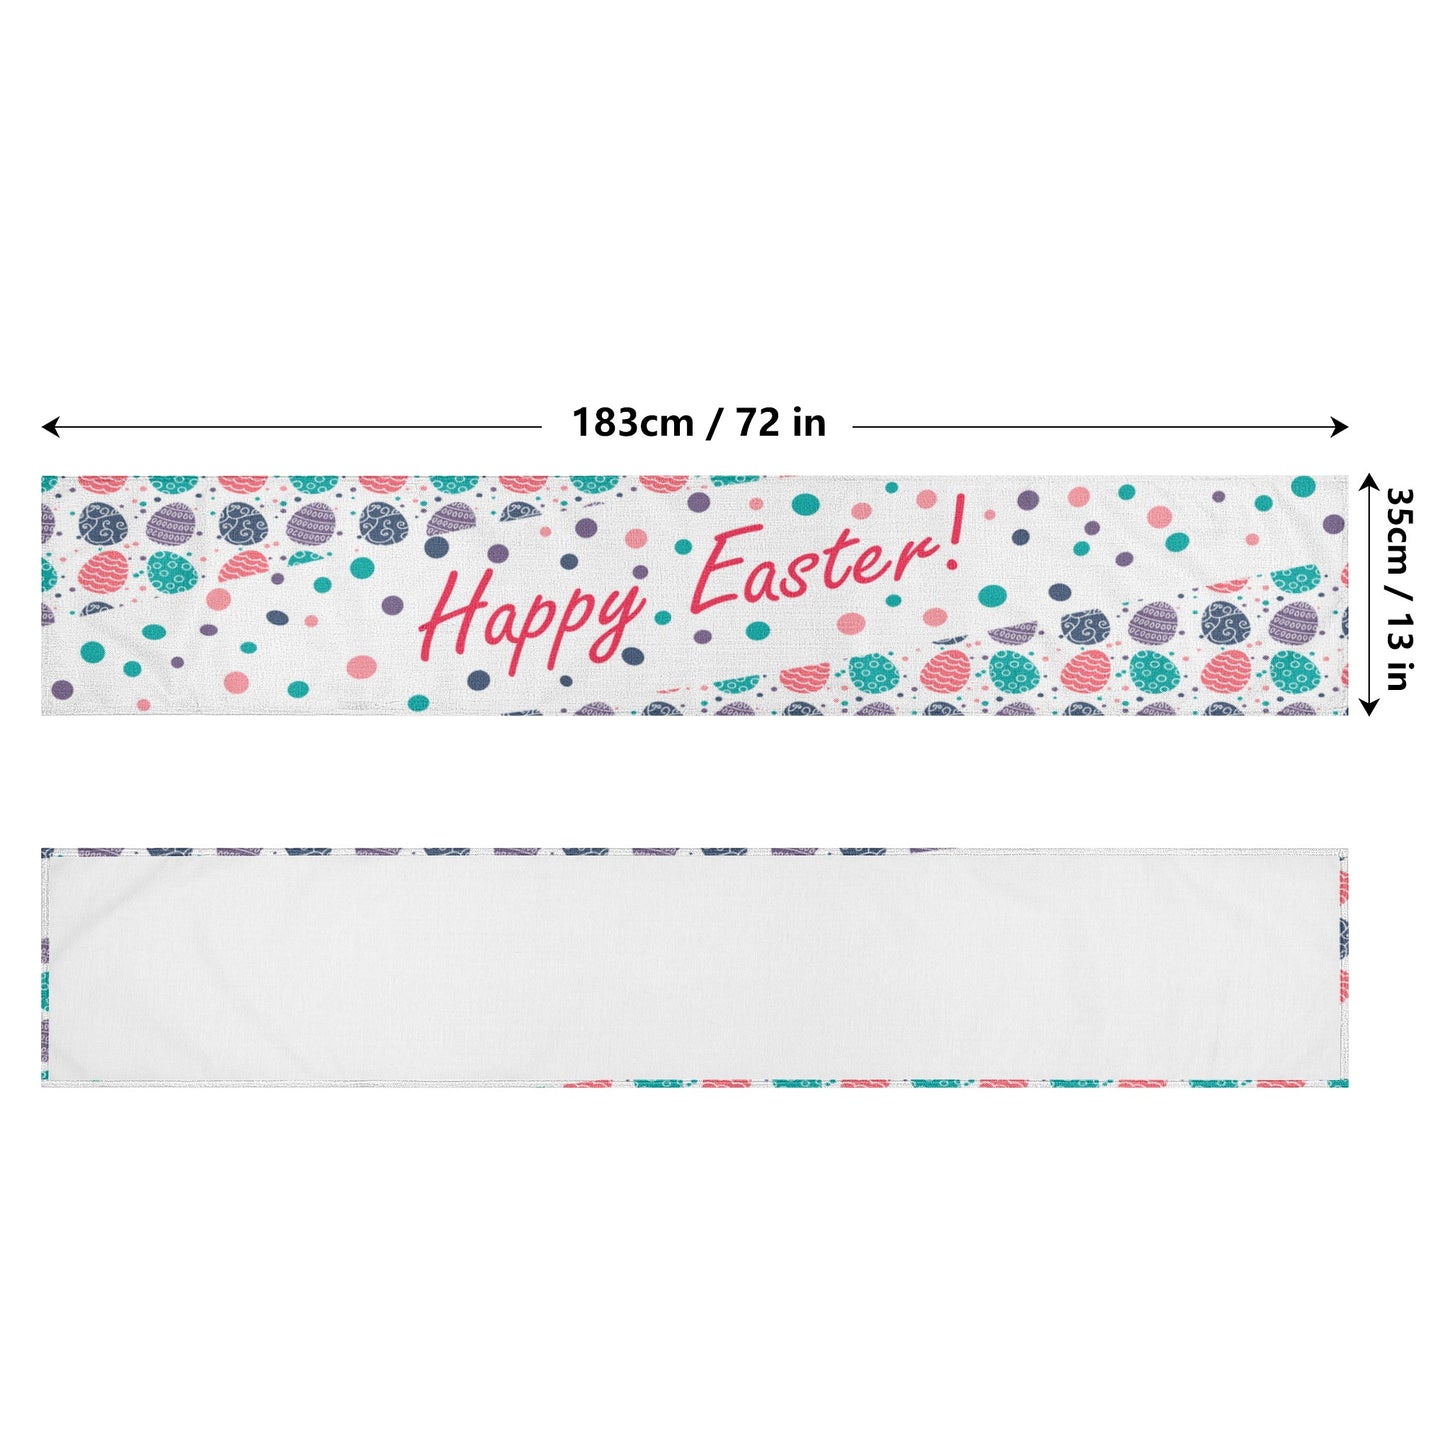 Spots, Dots and Eggs Happy Easter Customized Table Runner